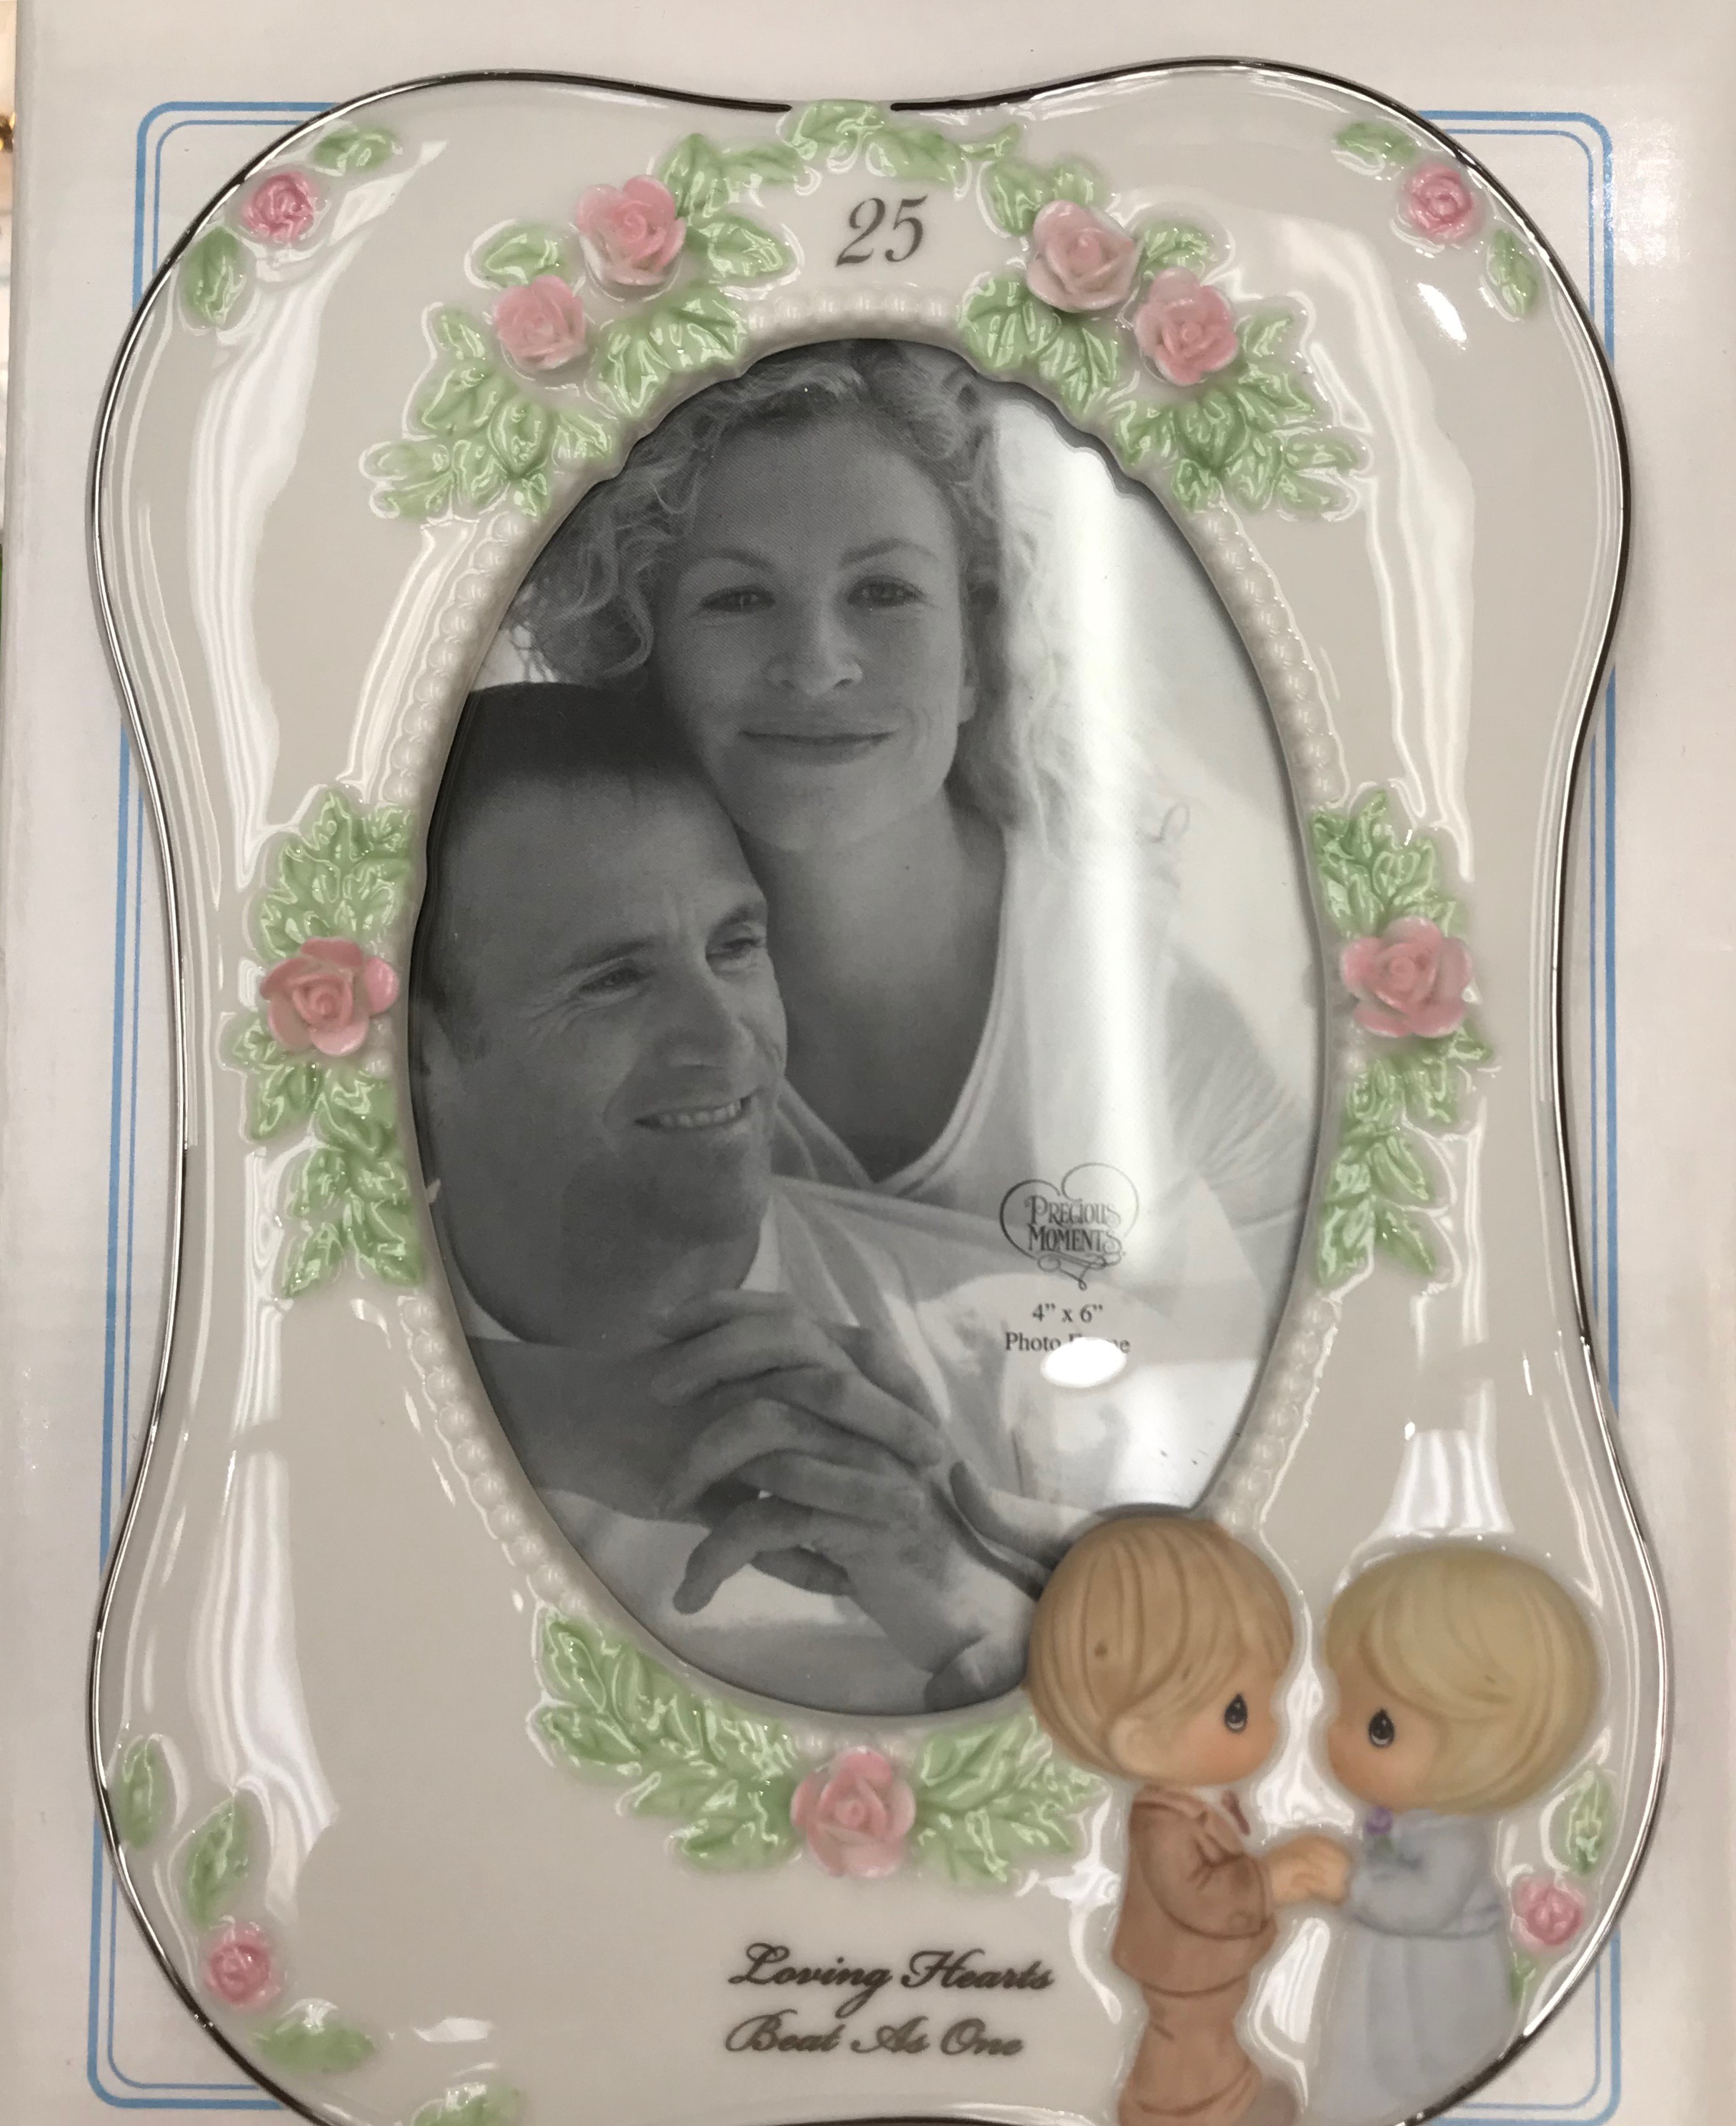 25th anniversary picture frame - Item # 14680